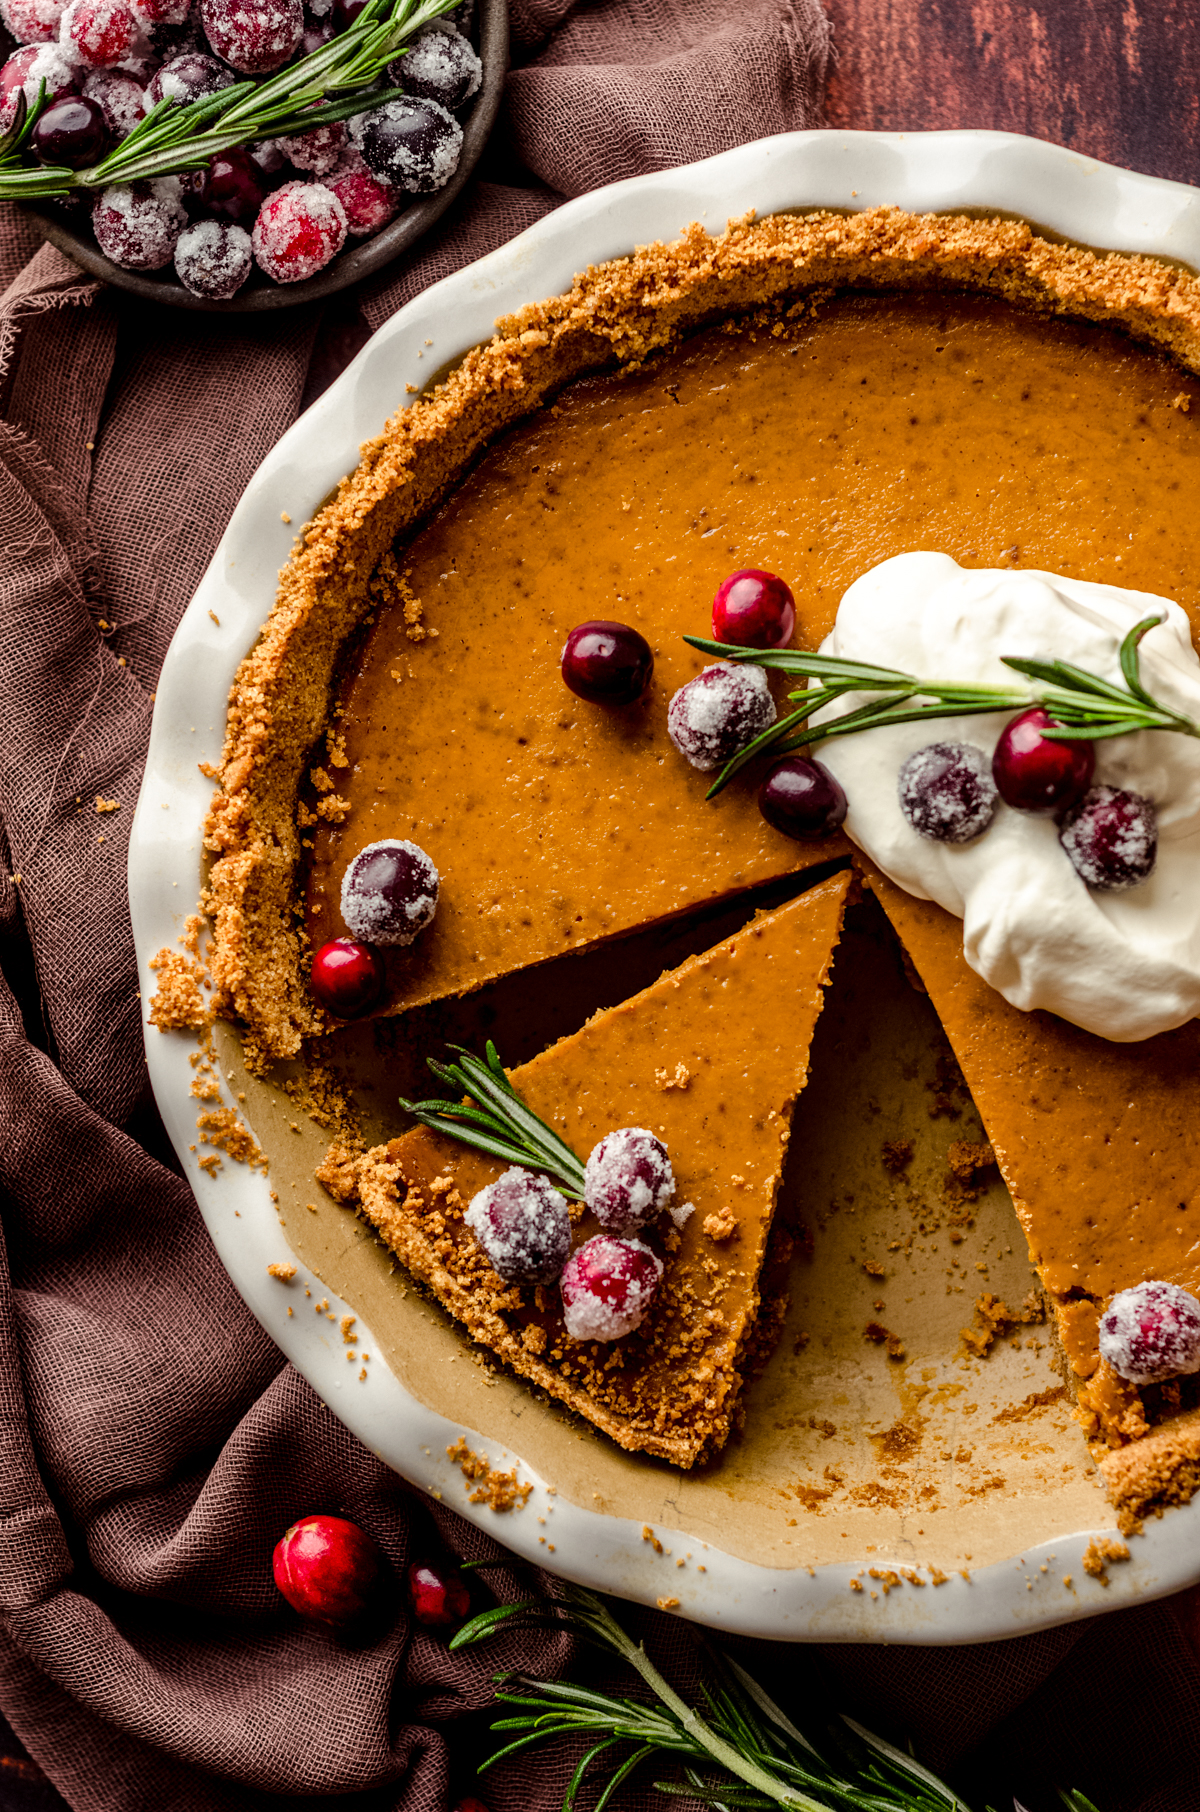 An aerial photo of pumpkin pie with graham cracker crust sliced in a pie plate and ready to serve. There is whipped cream, cranberries, and fresh rosemary garnish on the pie.